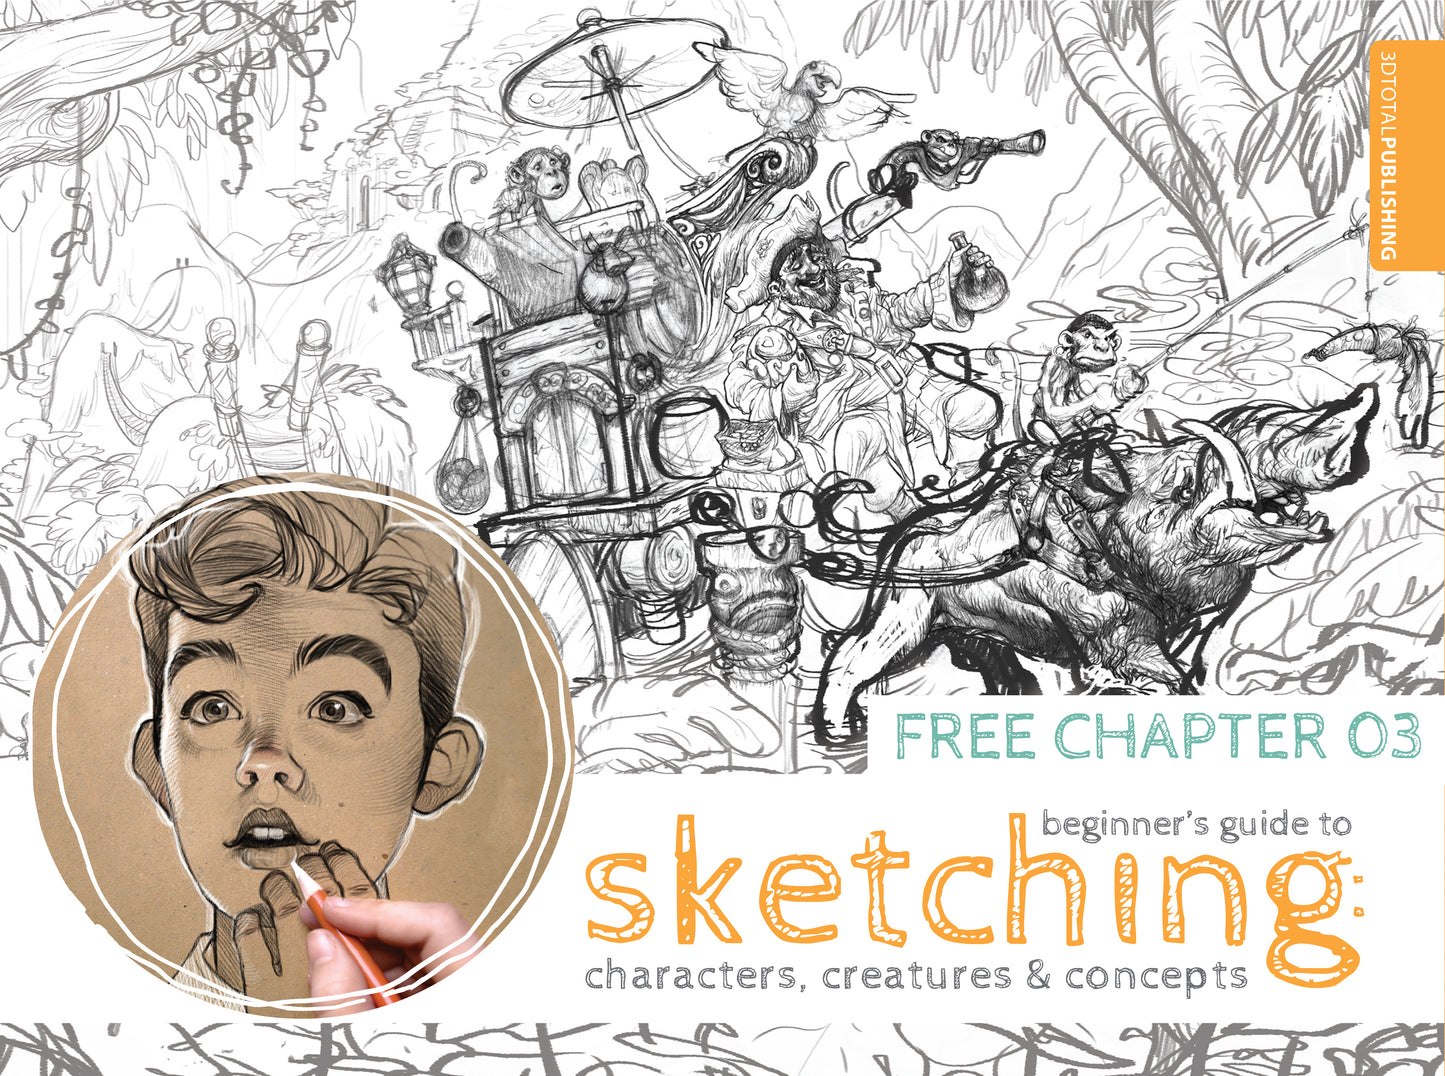 Beginner's Guide to Sketching - FREE CHAPTER 03 (Download Only)